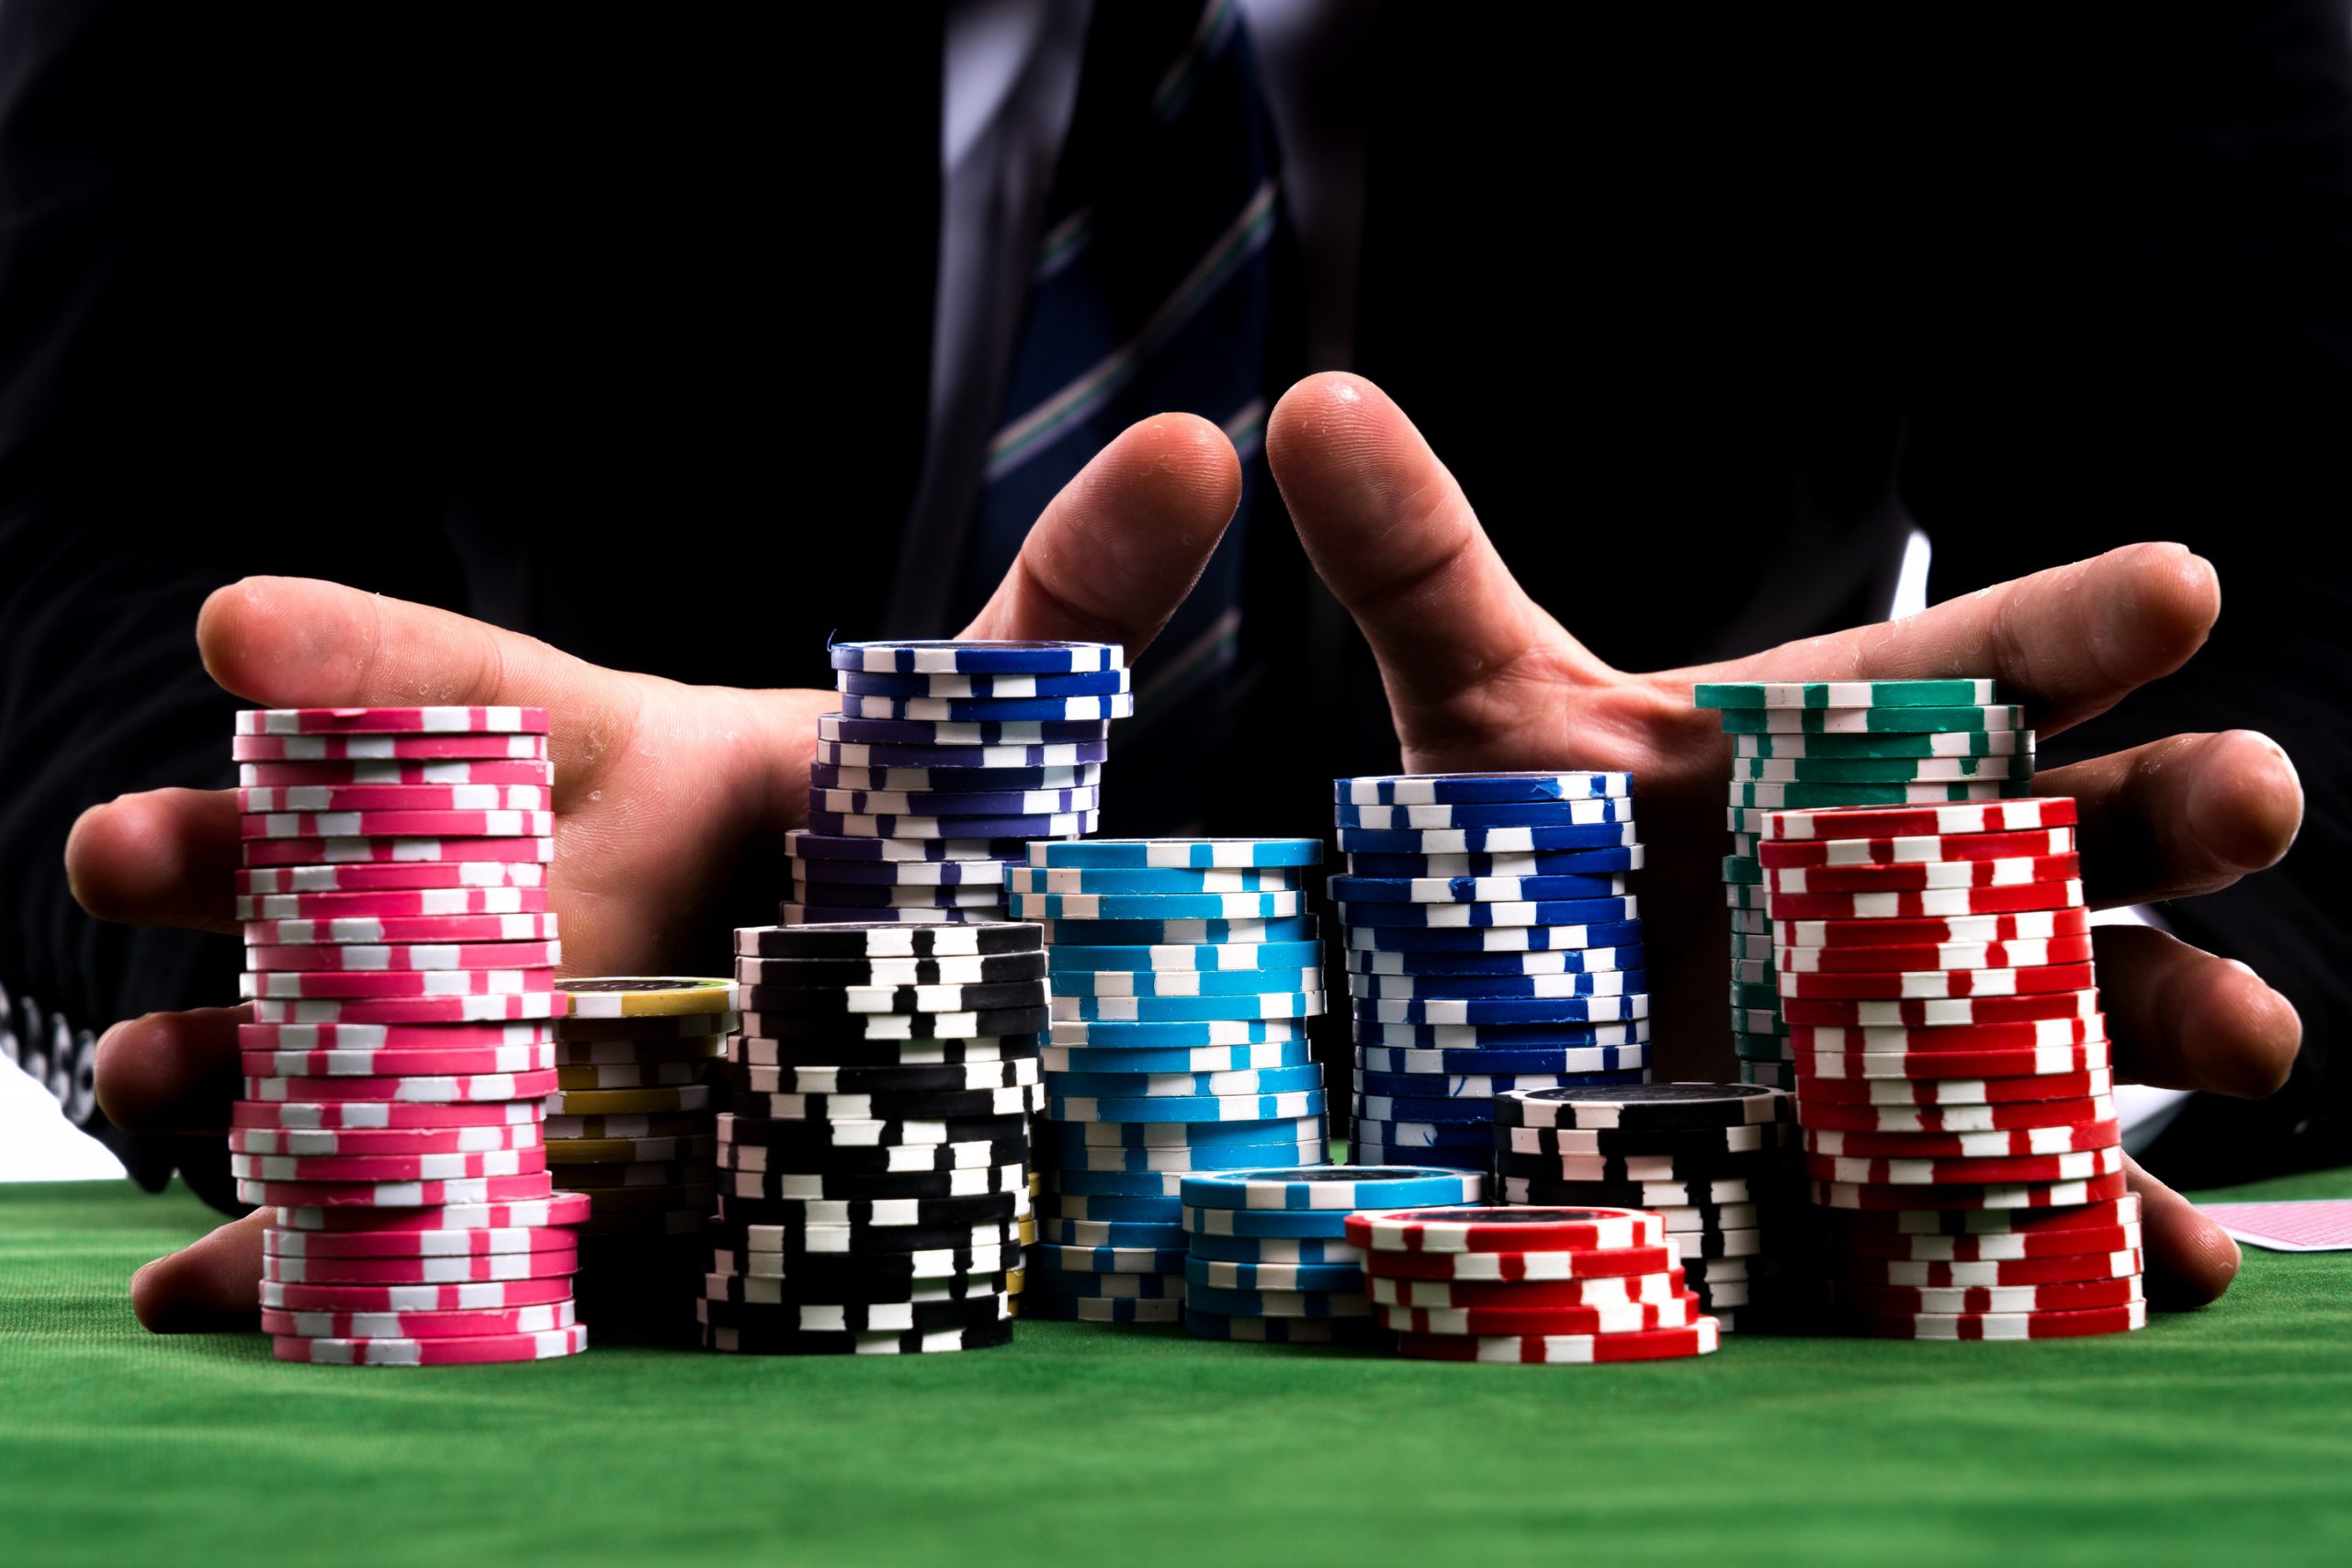 Know More About Online Casino Gaming Industry In Germany